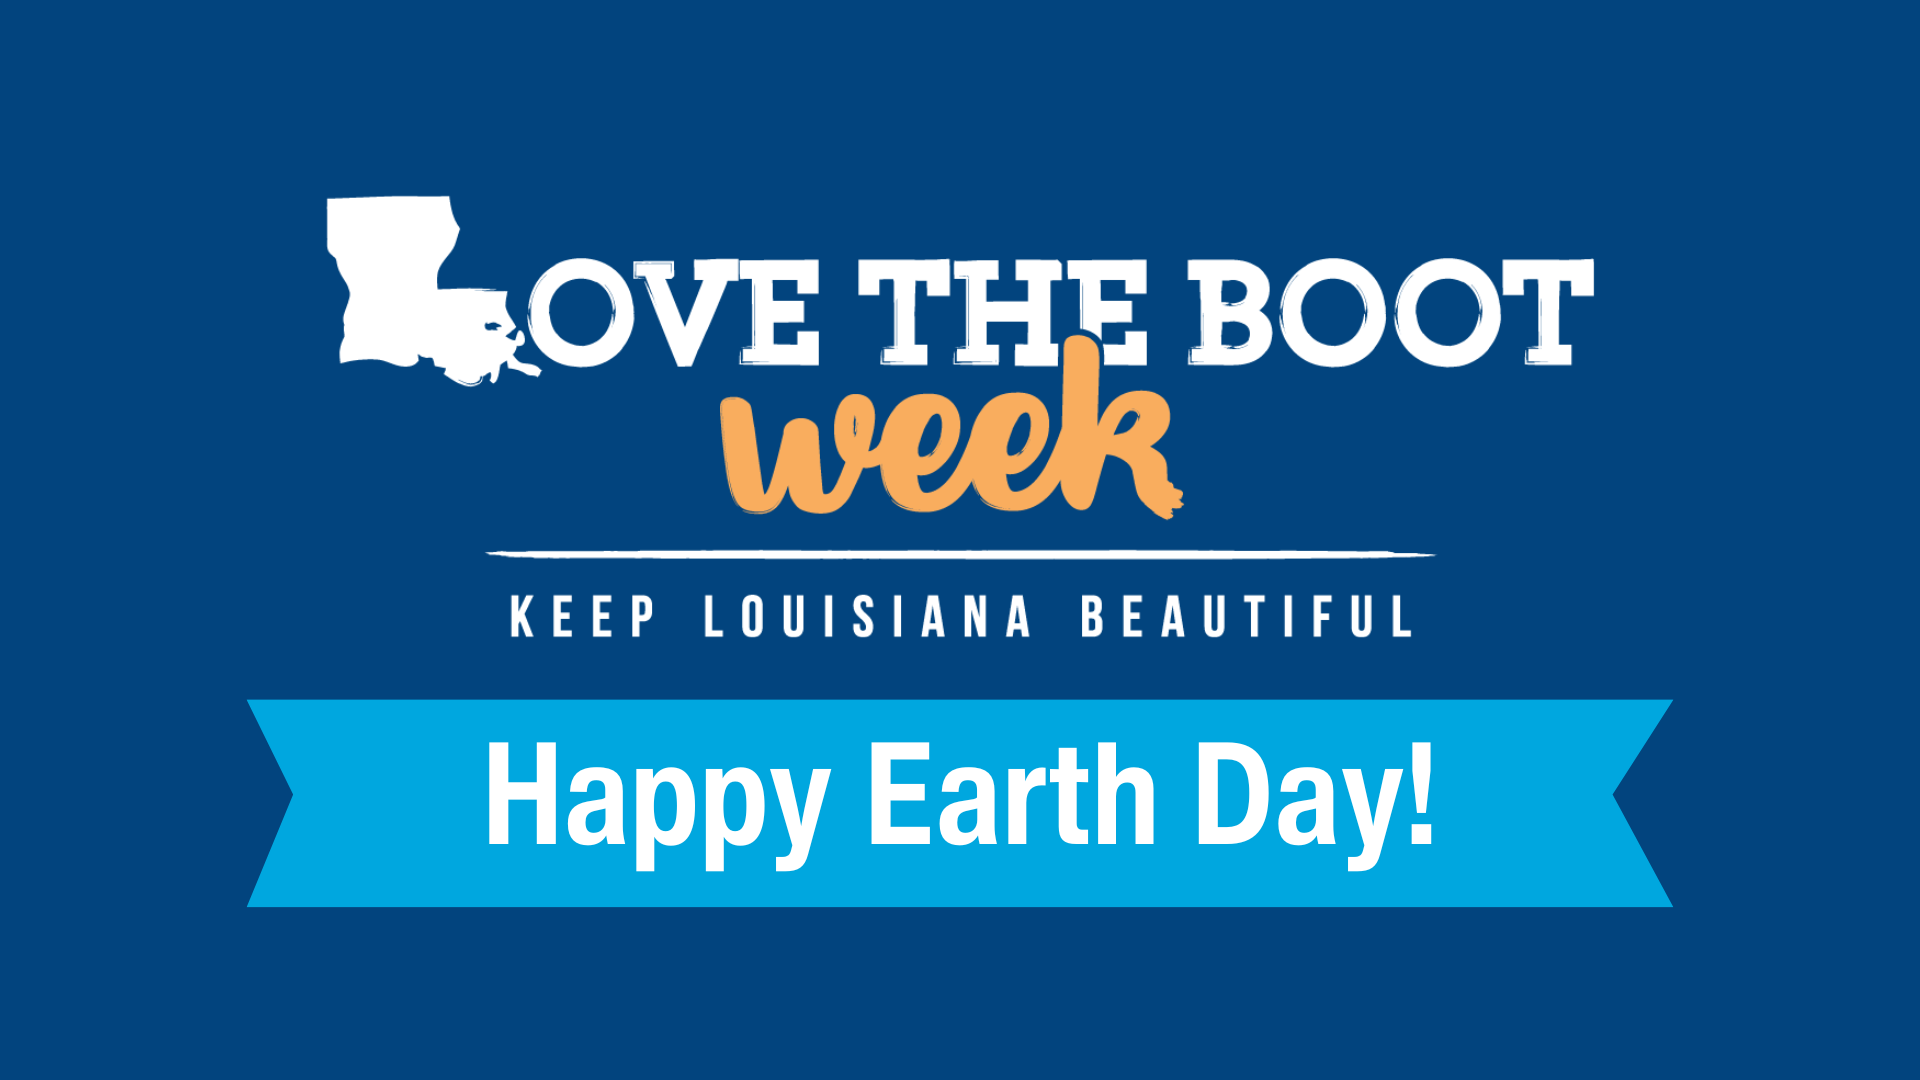 Happy Earth Day! Let's Love the Boot!